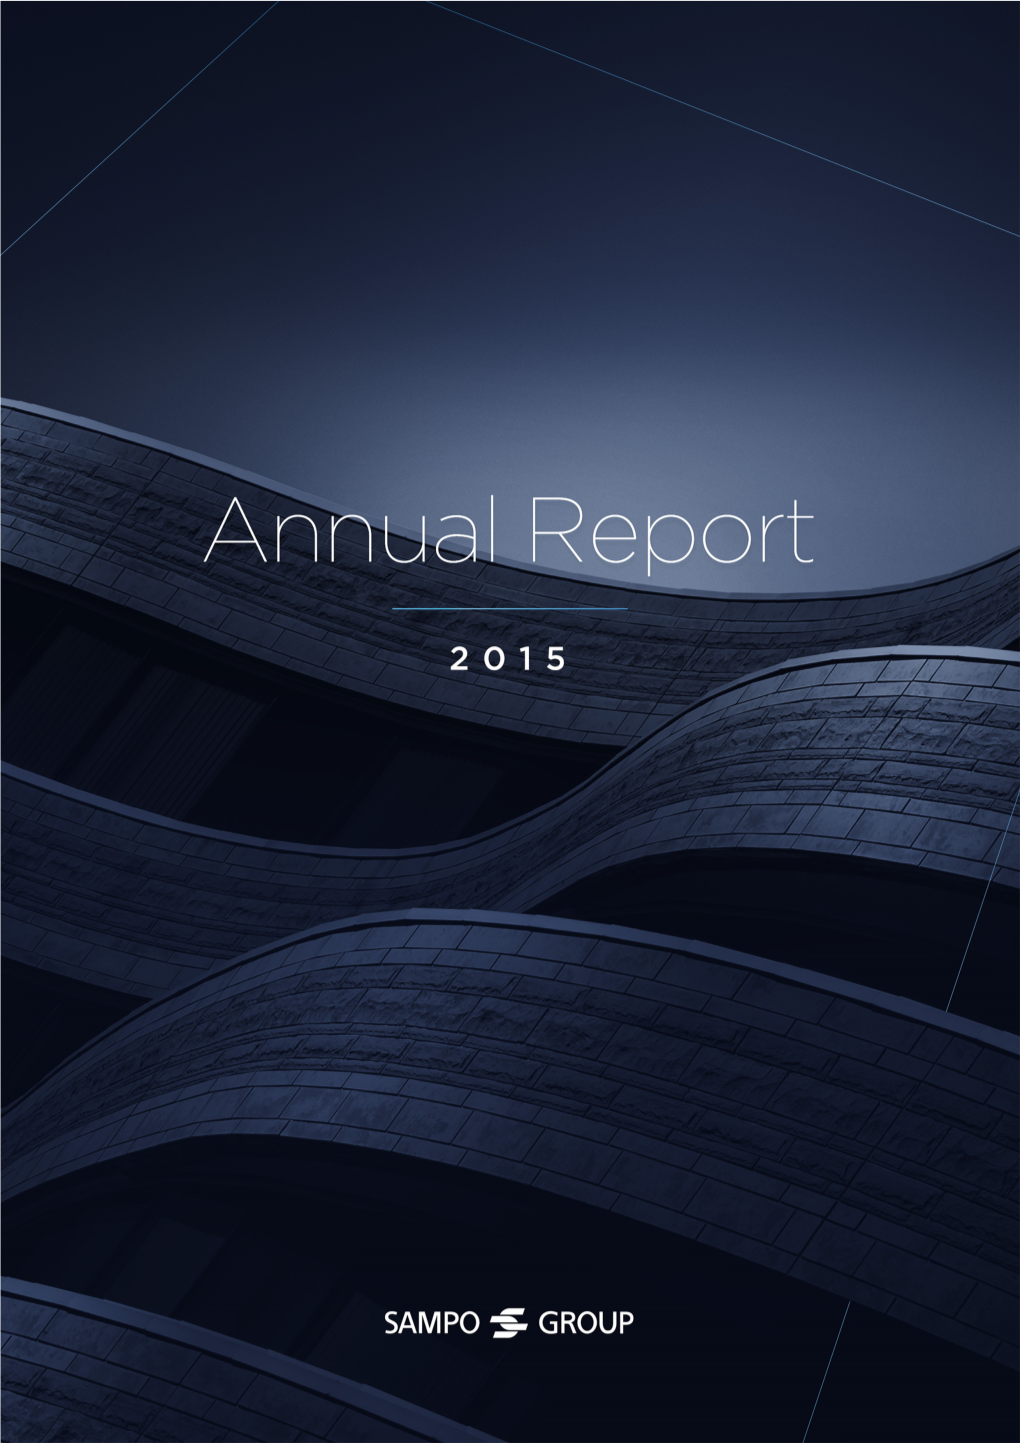 Sampo Group / Annual Report 2015